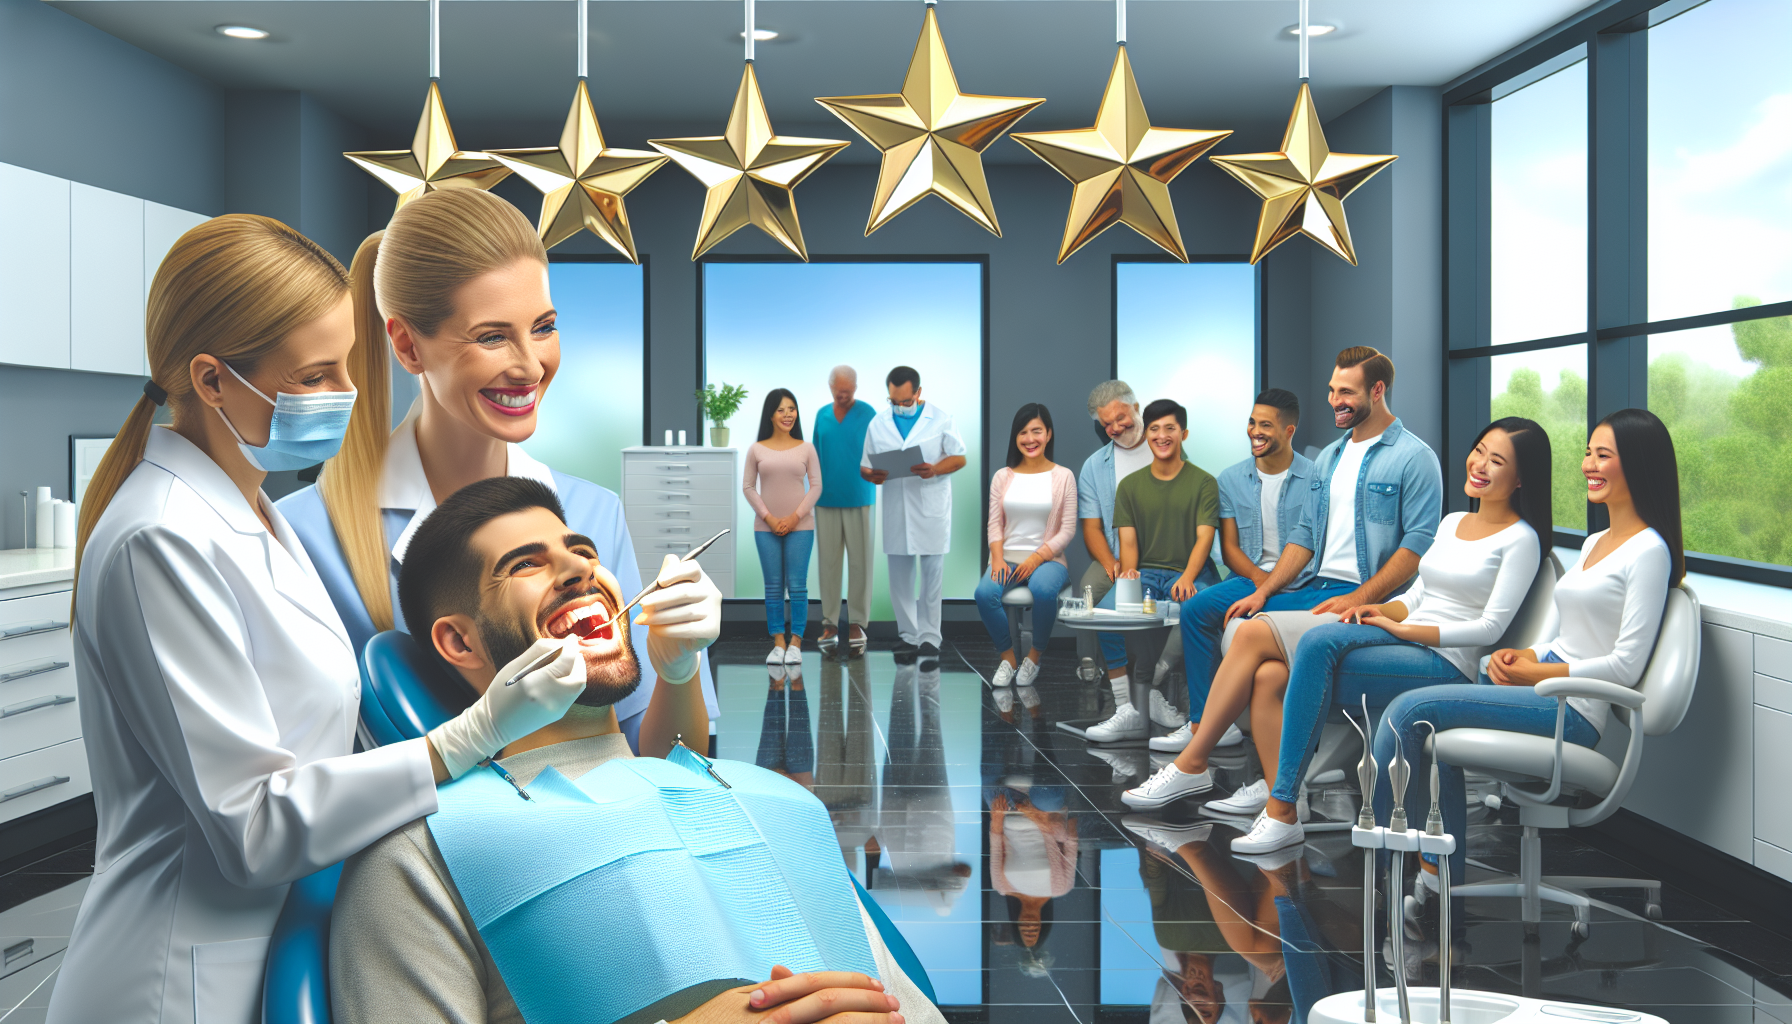 Dental practice with positive online reviews